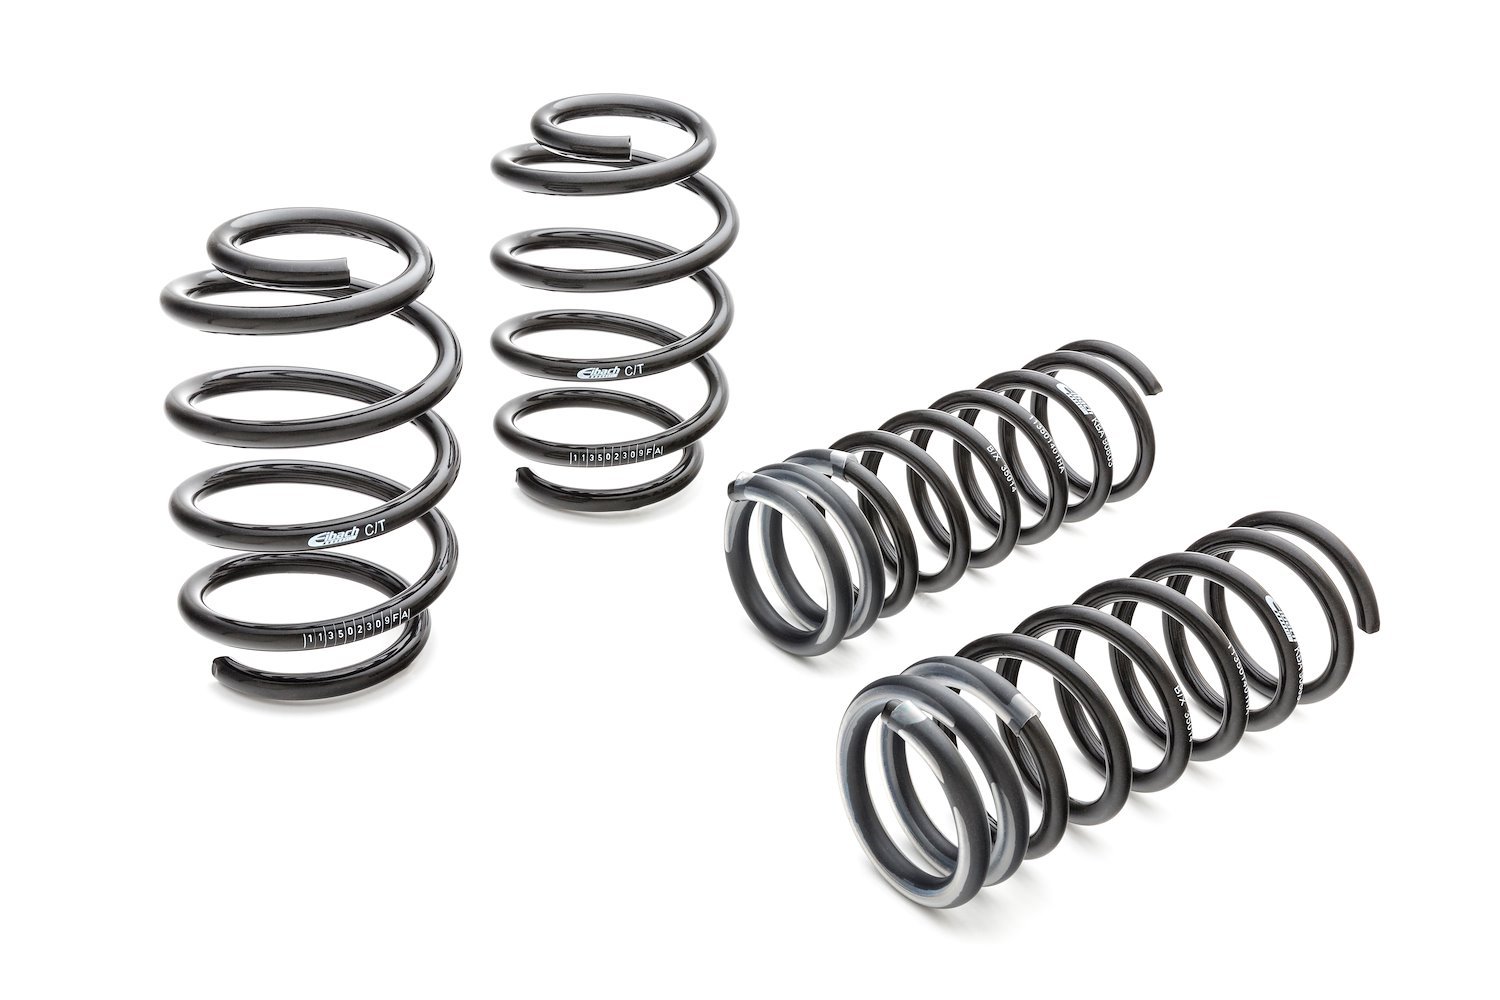 38148.140 Pro-Kit Lowering Springs 2011-2015 Cadillac CTS-V Coupe - .900" Front/1.100" Rear Drop